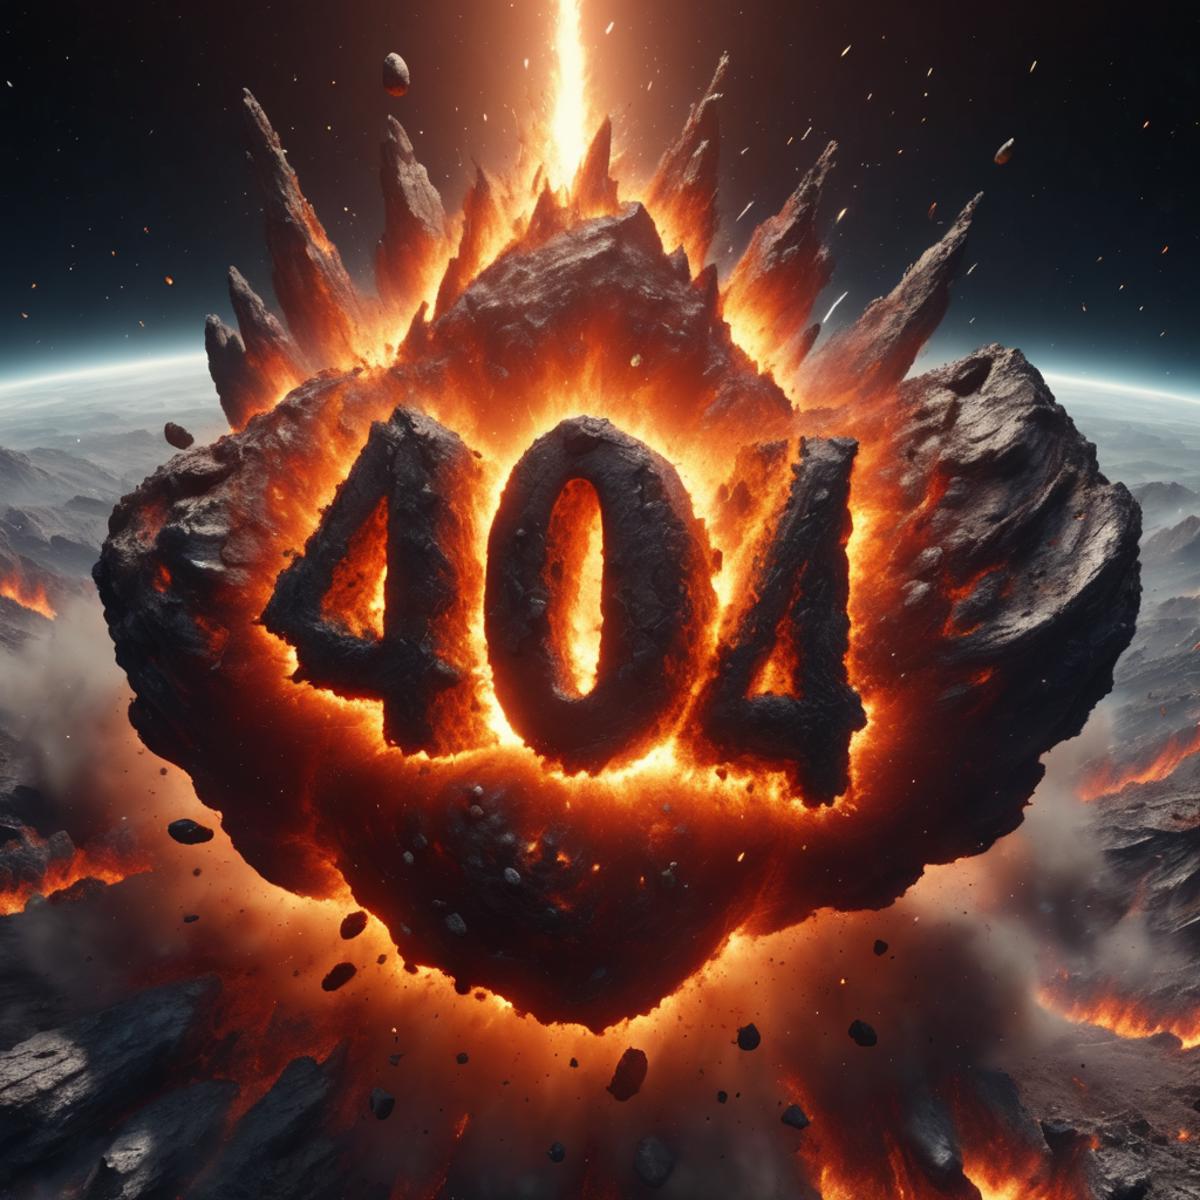 A large rock with the number 404 on it, surrounded by fire.